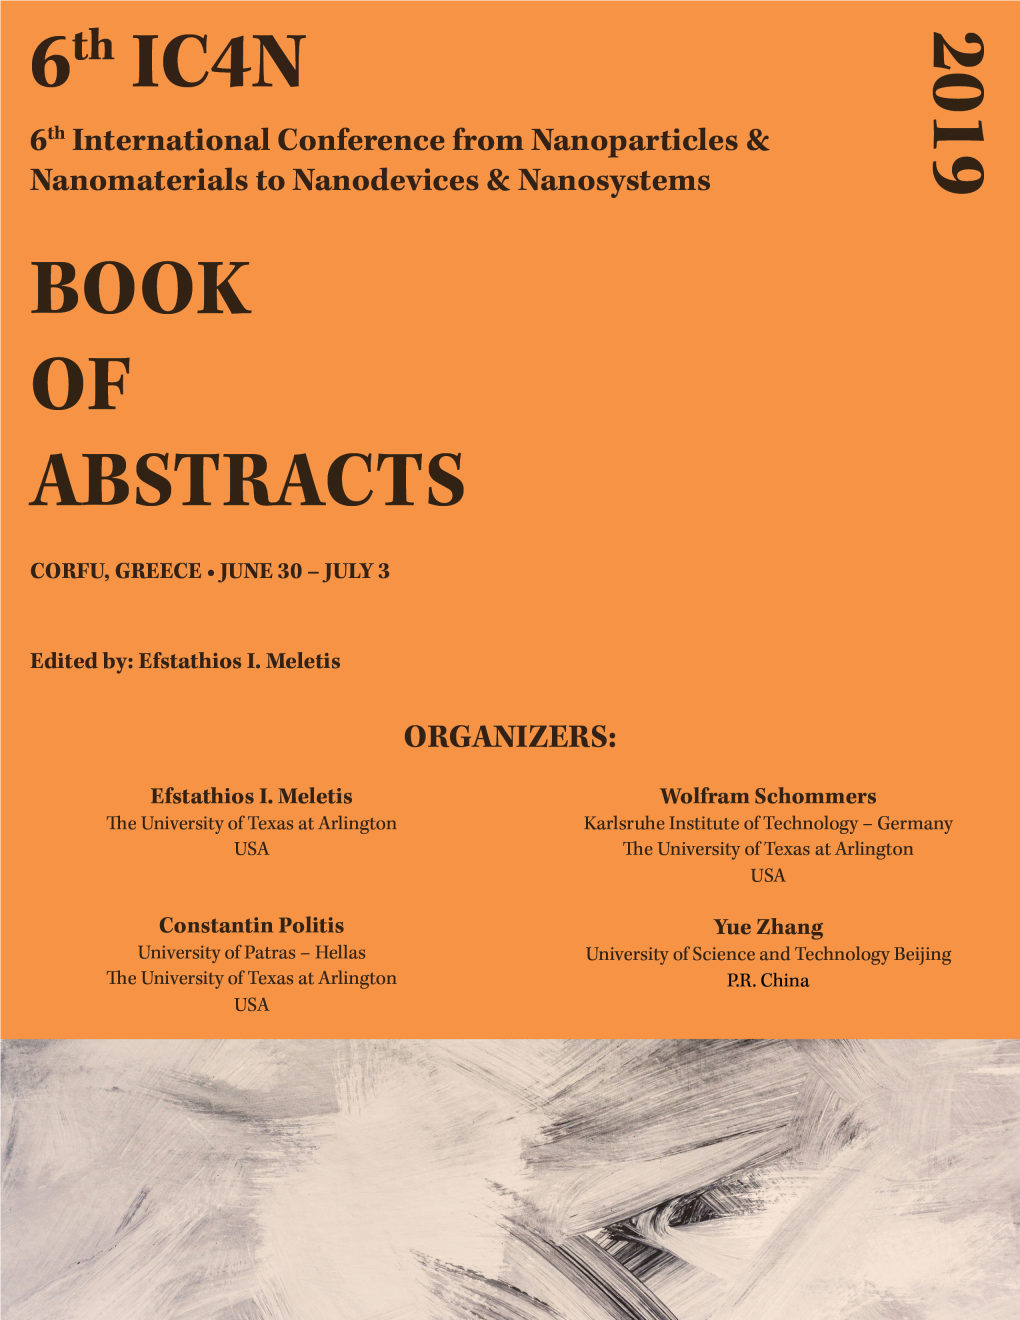 6Th IC4N Book of Abstracts